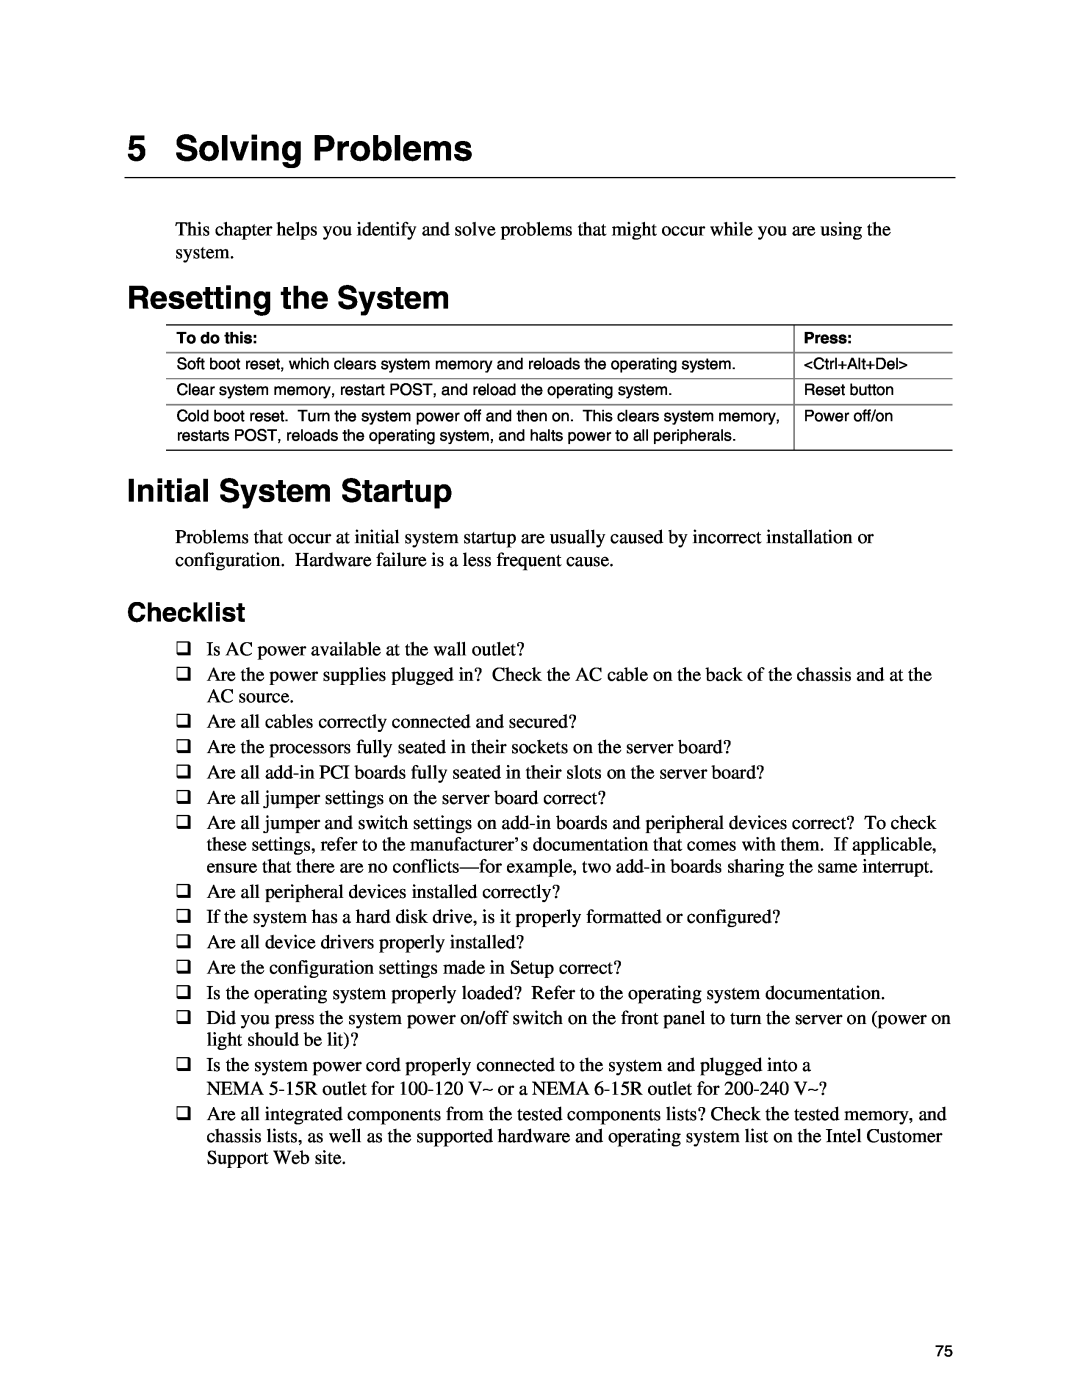 Intel SE7500CW2 manual Solving Problems, Resetting the System, Initial System Startup, Checklist 